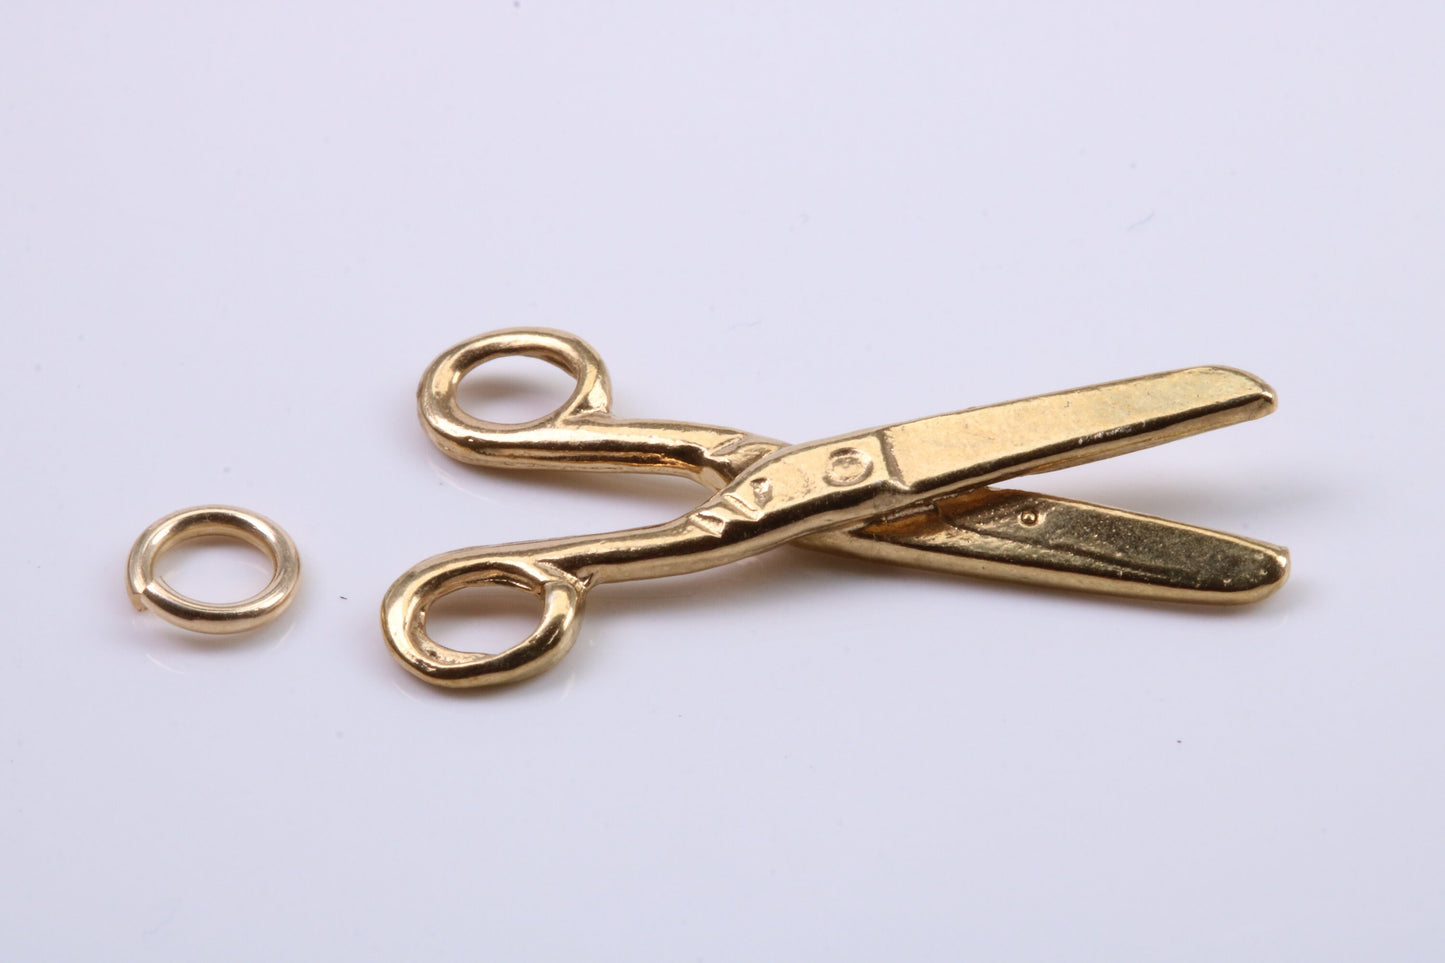 Scissor Charm, Traditional Charm, Made from Solid 9ct Yellow Gold, British Hallmarked, Complete with Attachment Link